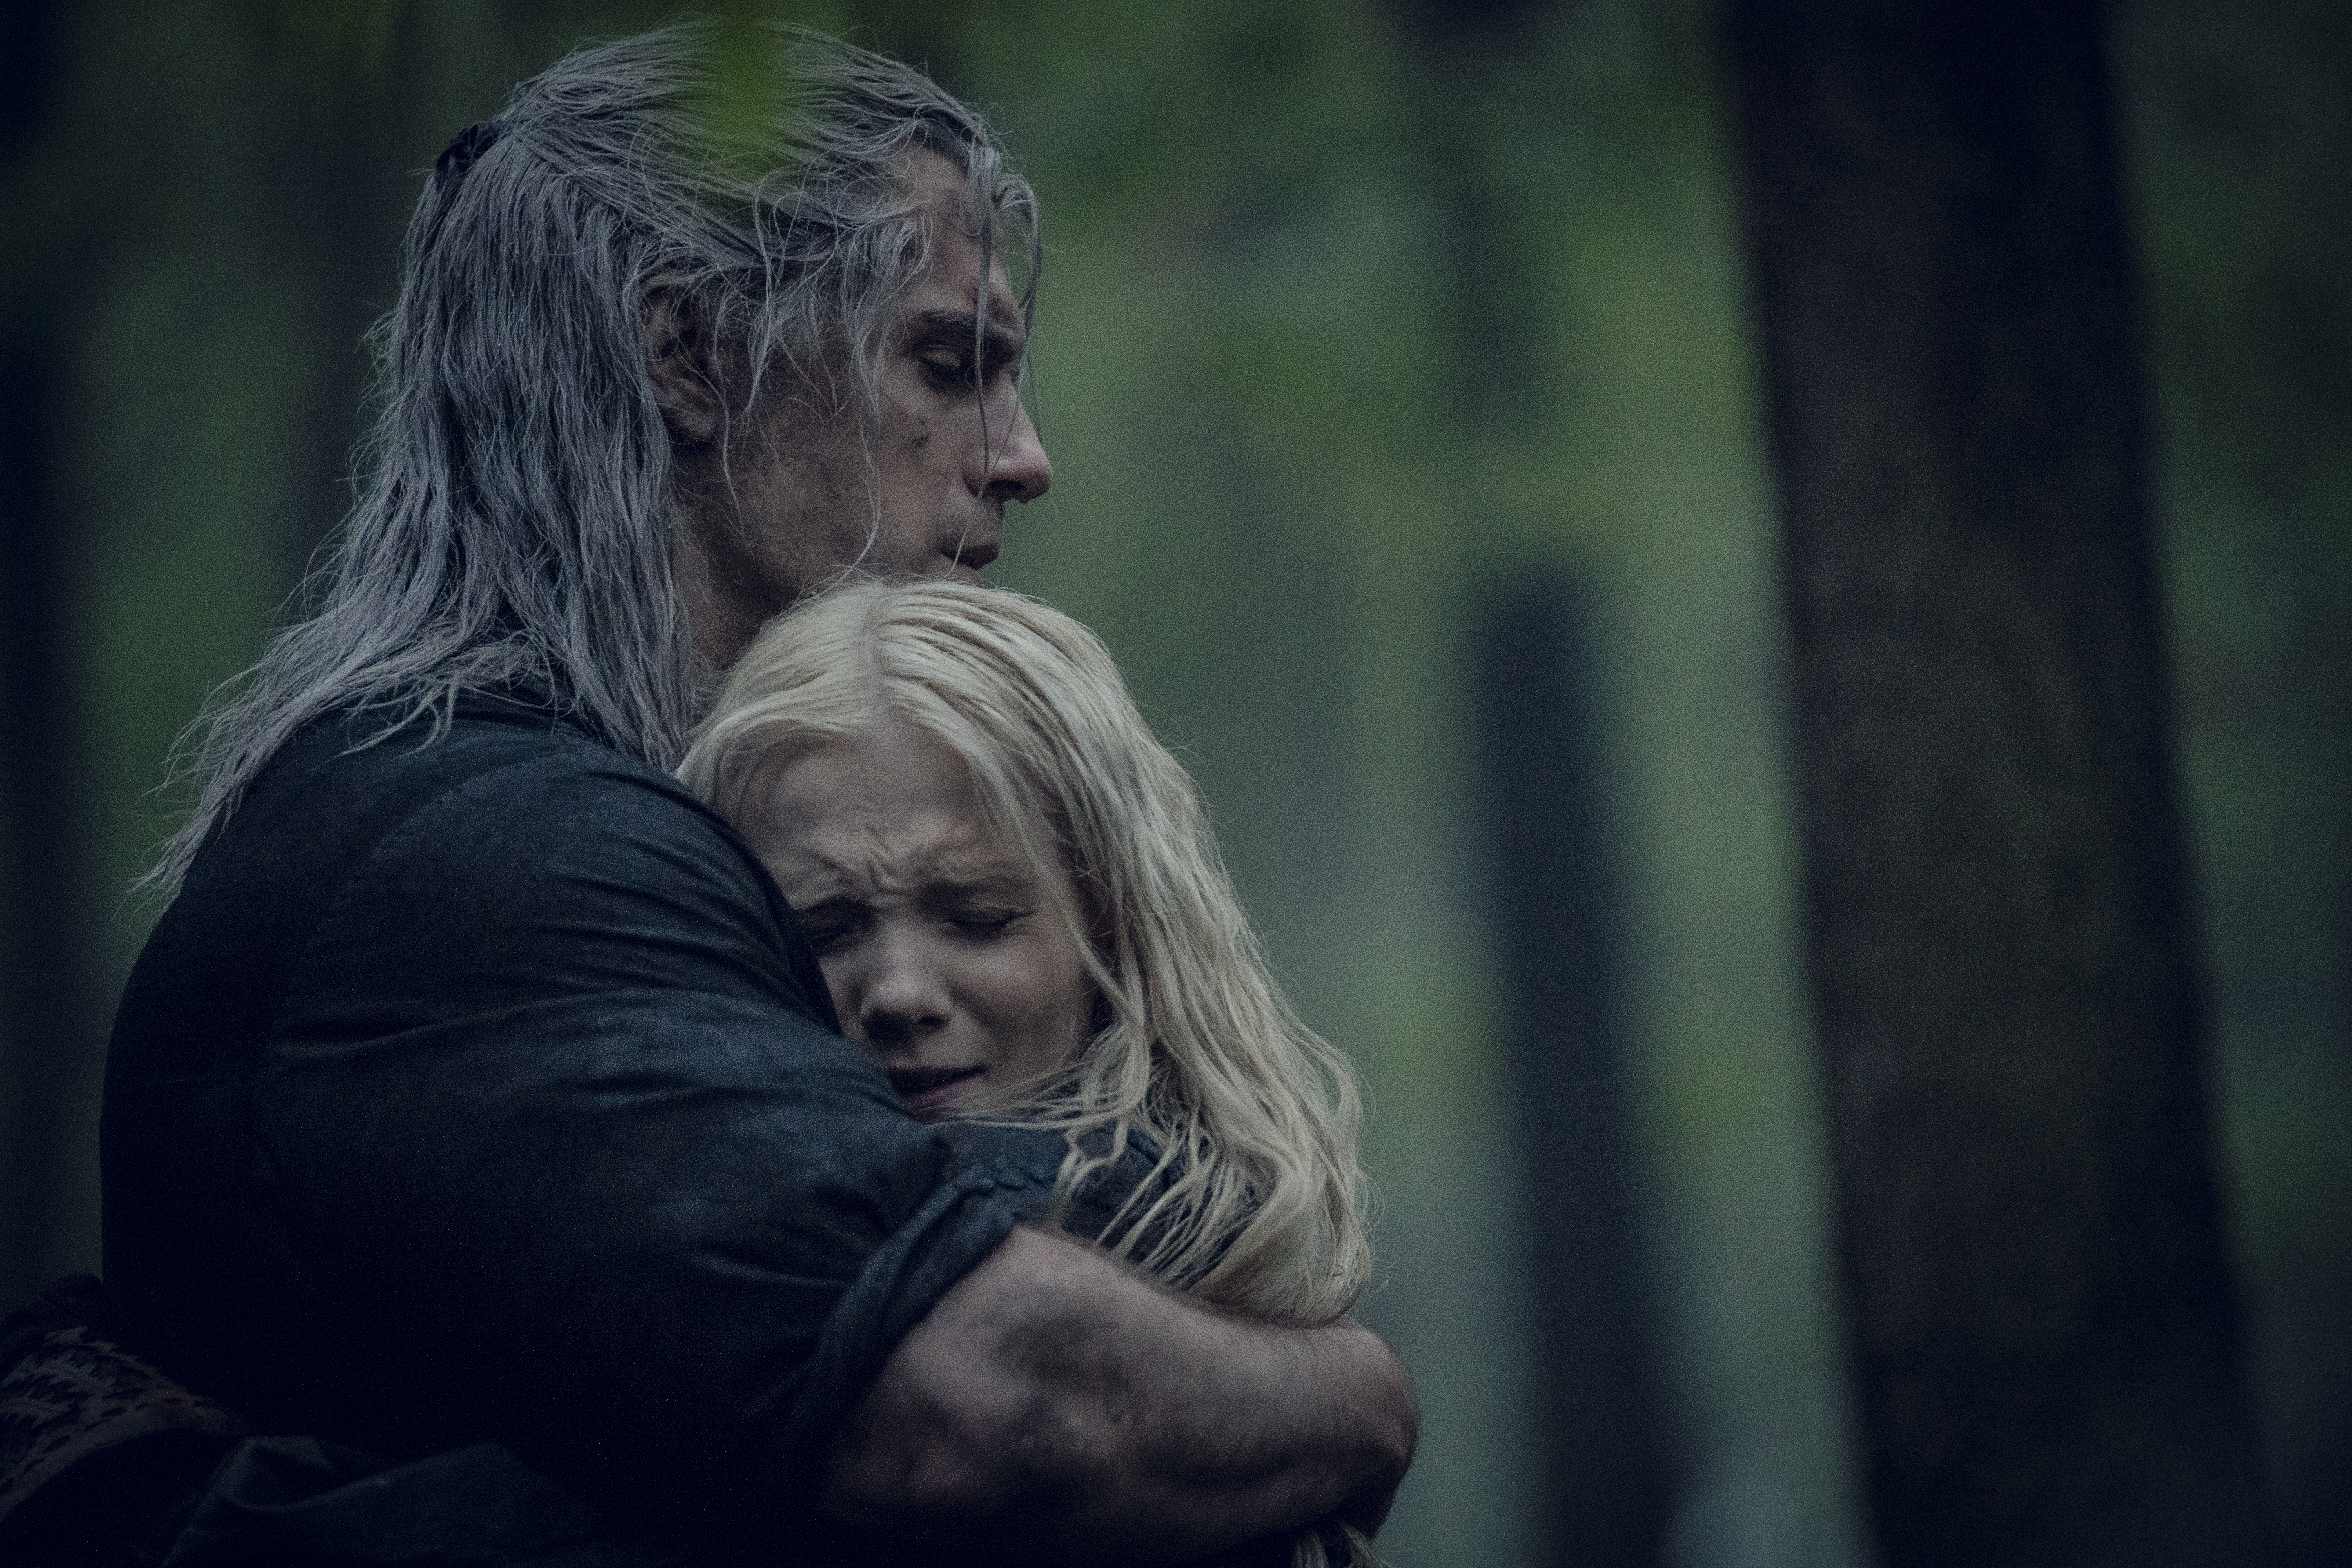 Ciri and Geralt hugging in a still from season 1 of The Witcher